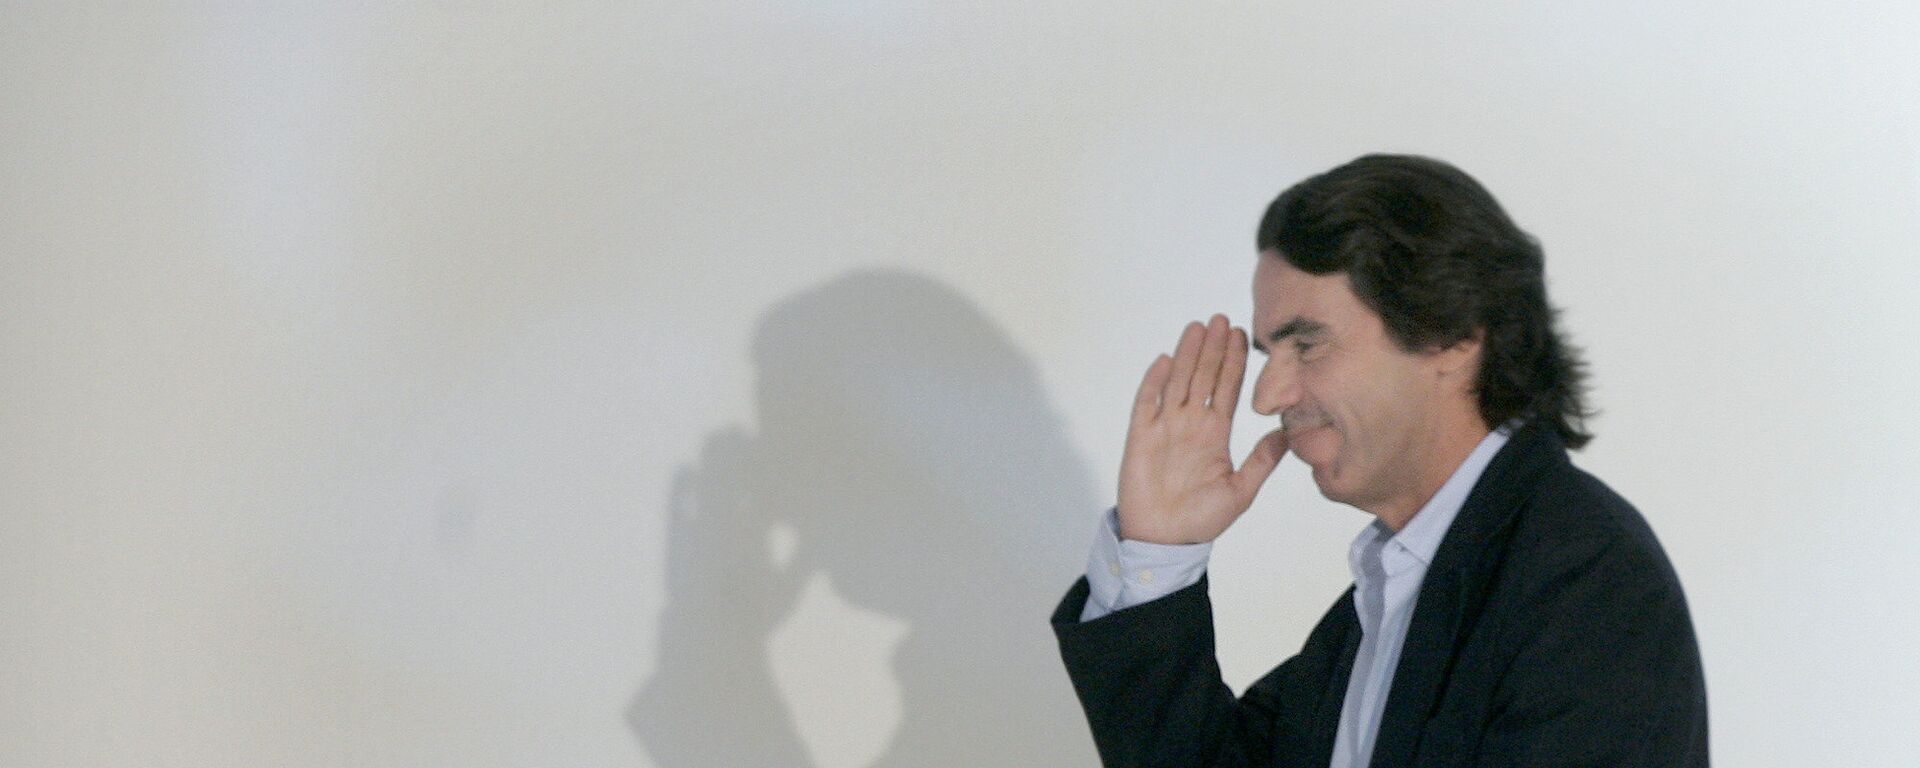 Former Spanish Prime Minister and honorary president of the Popular Party Jose Maria Aznar, salutes after his speech during the second day of the party's XVI th congress in Valencia, Spain, Saturday, June, 21, 2008 - Sputnik Mundo, 1920, 24.03.2021